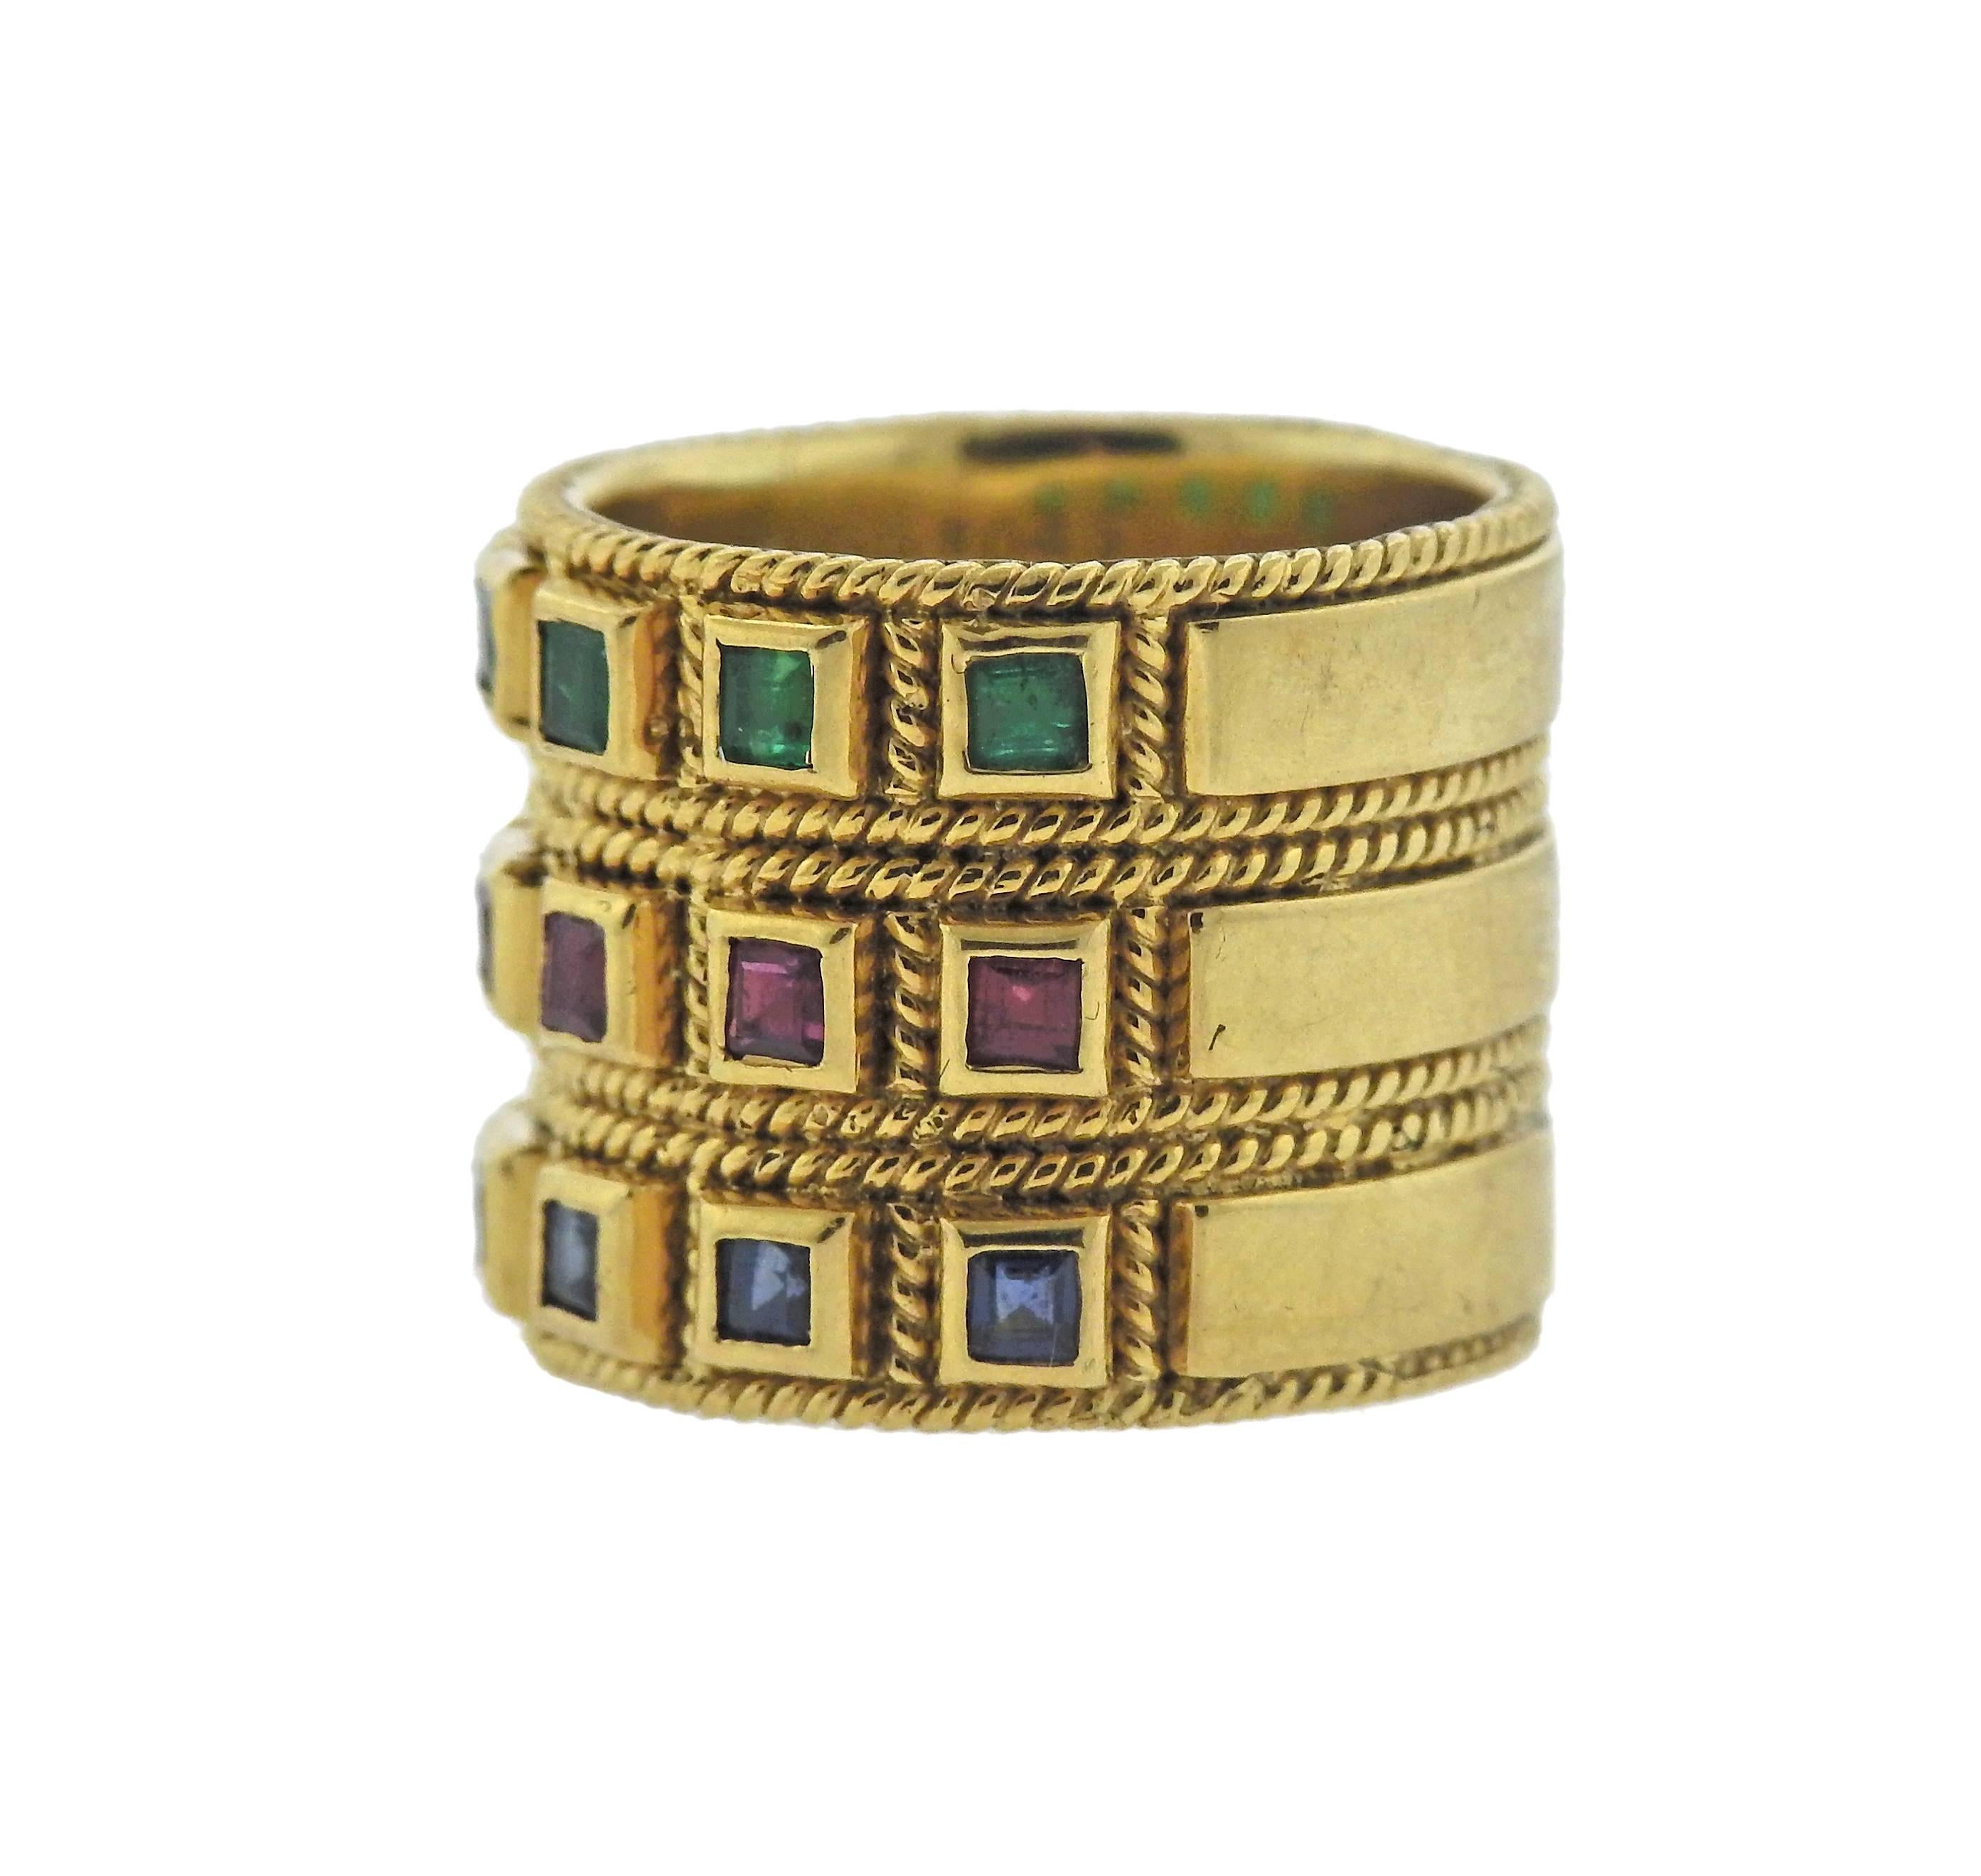 Wide 18k yellow gold band ring, set with 0.38ctw in emeralds, 0.45ctw in rubies and 0.51ctw in sapphires. Ring is a size 6 and 16.7mm wide. Marked: E0.38, R0.45, S0.51, 750 k18. Weight of the piece - 19.6 grams. 